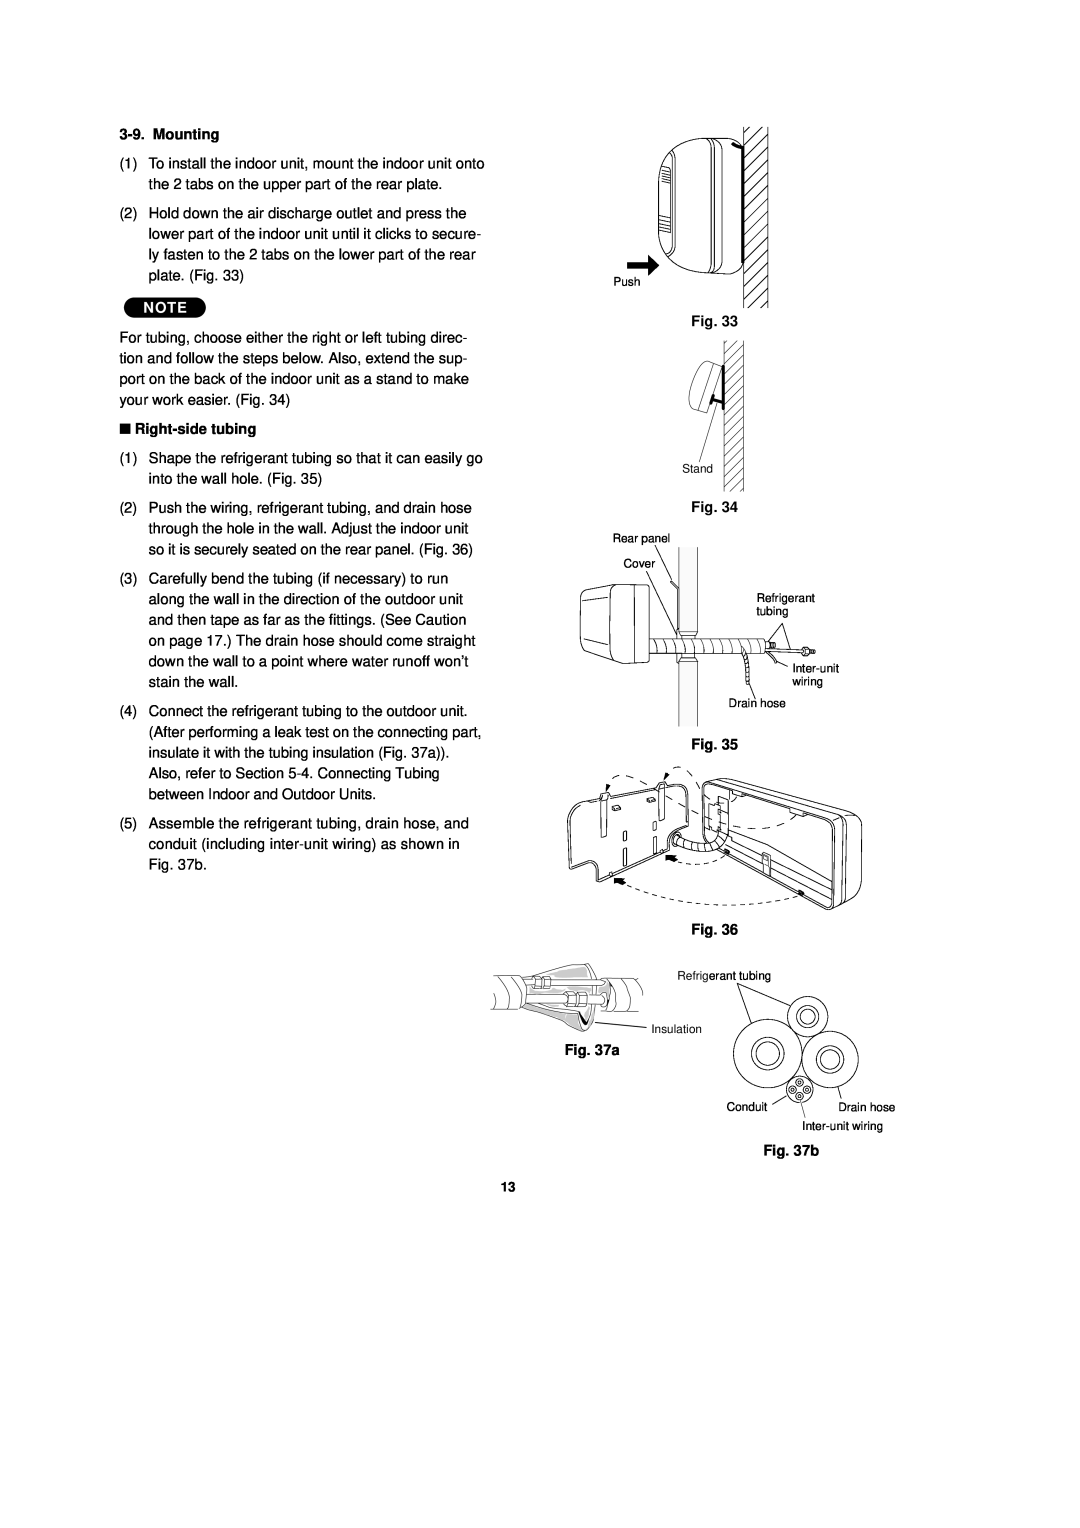 Sanyo C1251, C1852, CL0951, CL1852, CL1251, C0951 installation instructions Mounting, Right-sidetubing, Fig. Fig 